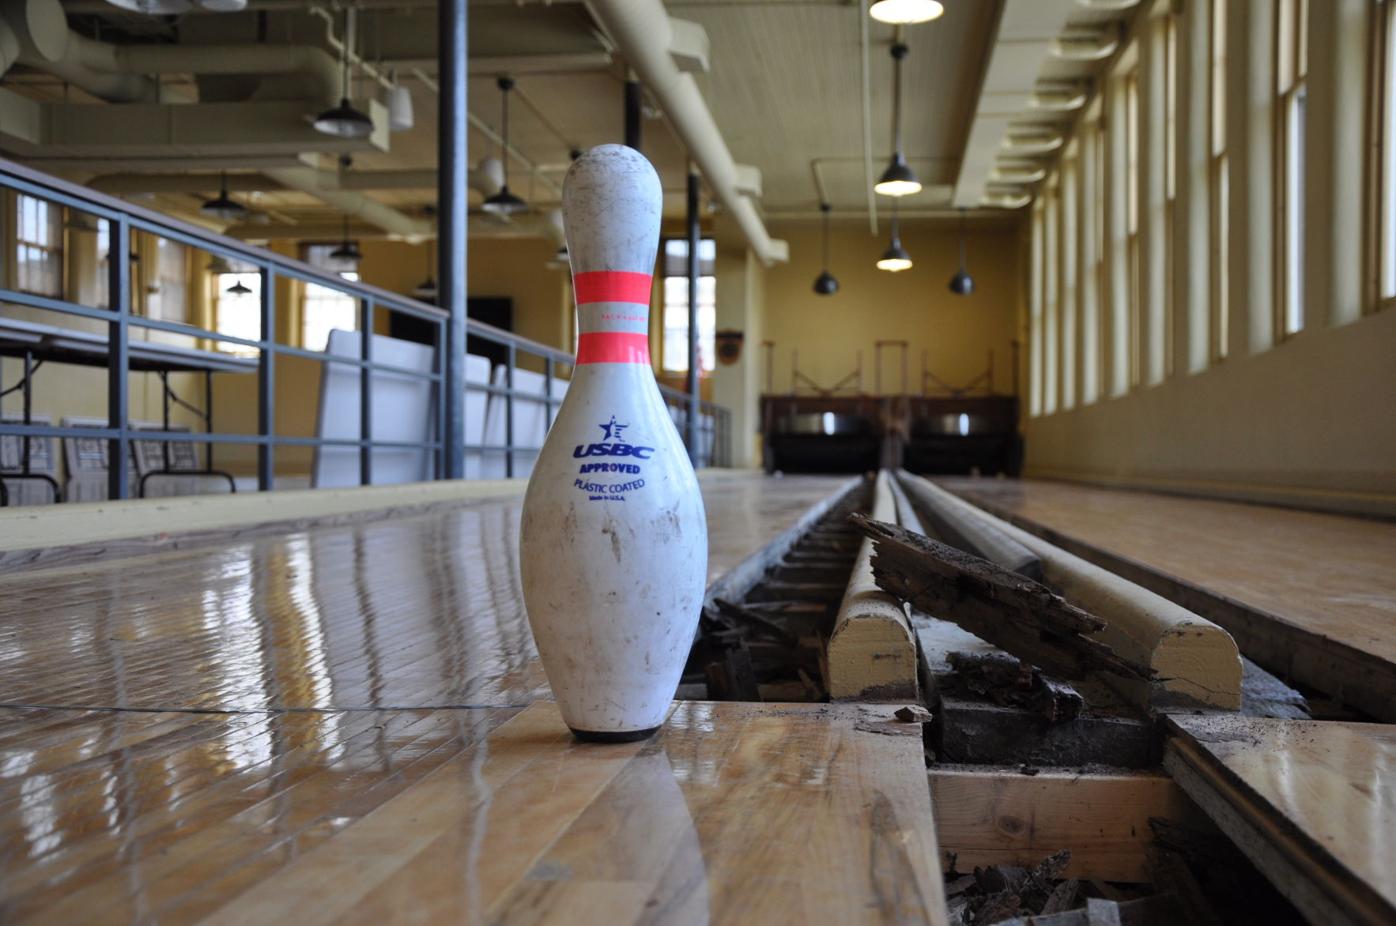 Fort Club S Historic Bowling Alley In Need Of Repair Funds News Dailyunion Com